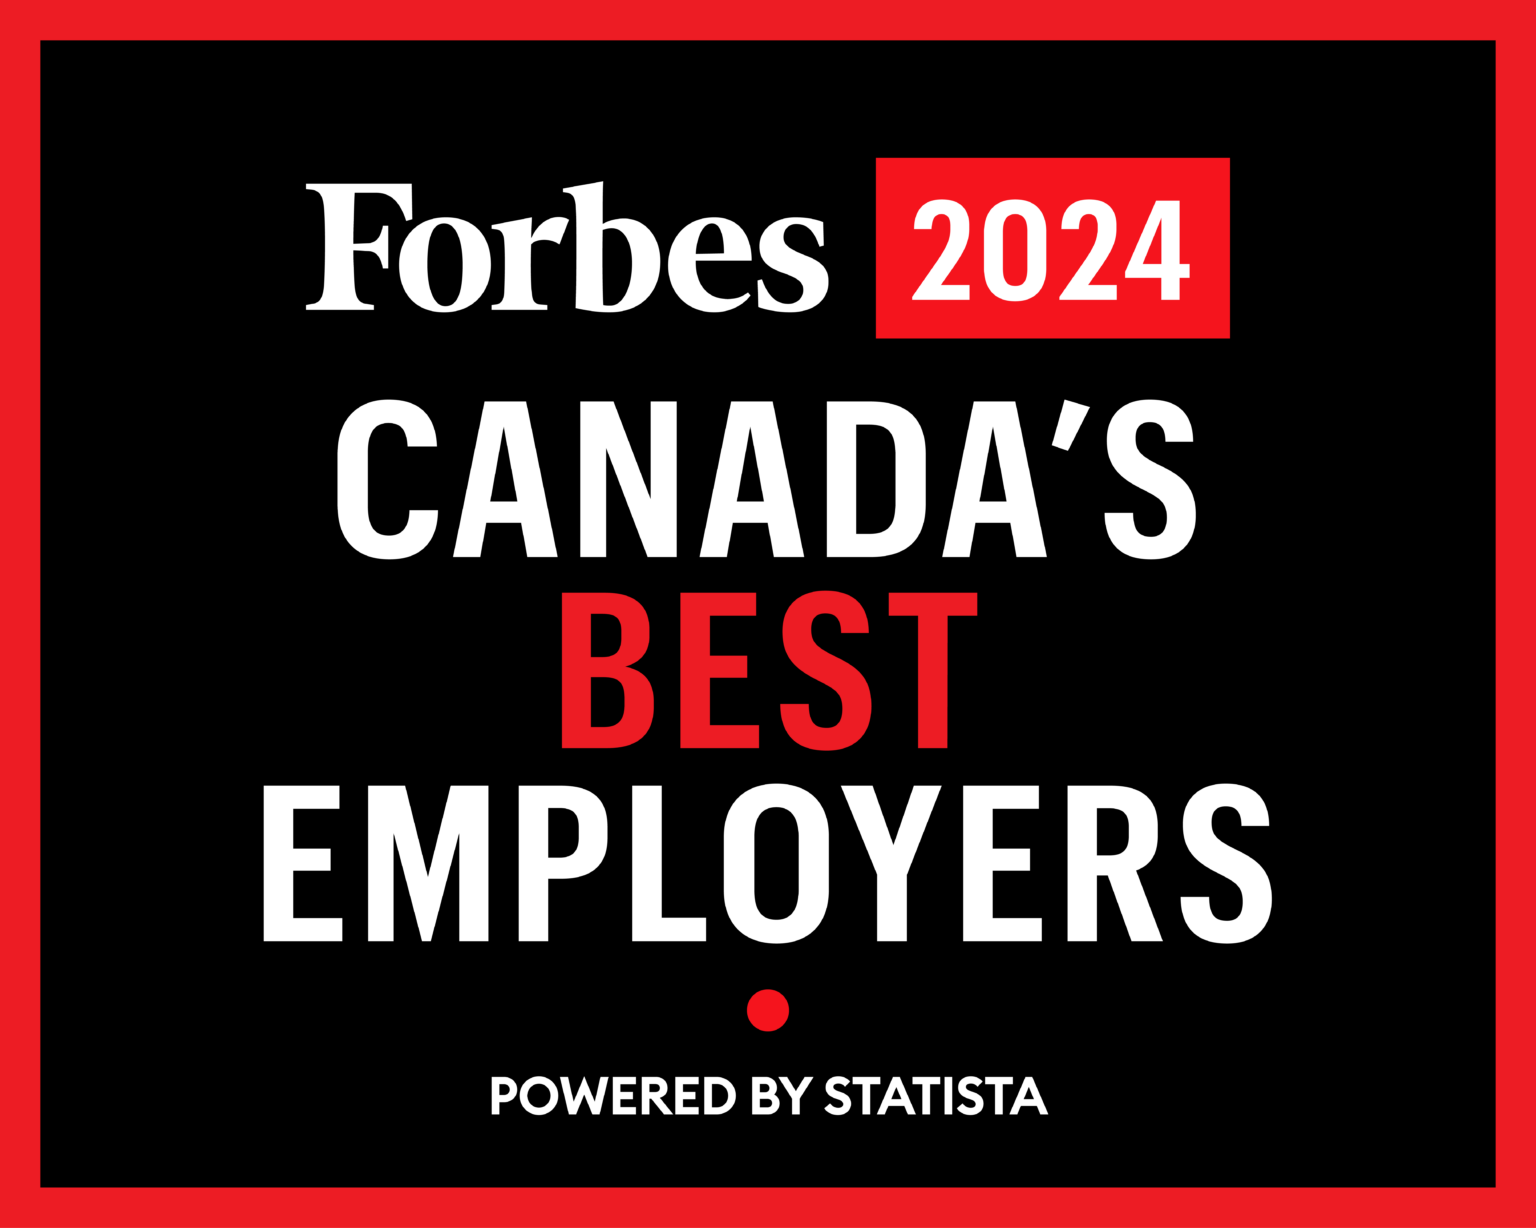 Gordon Food Service Canada Awarded on the Forbes Canada’s Best